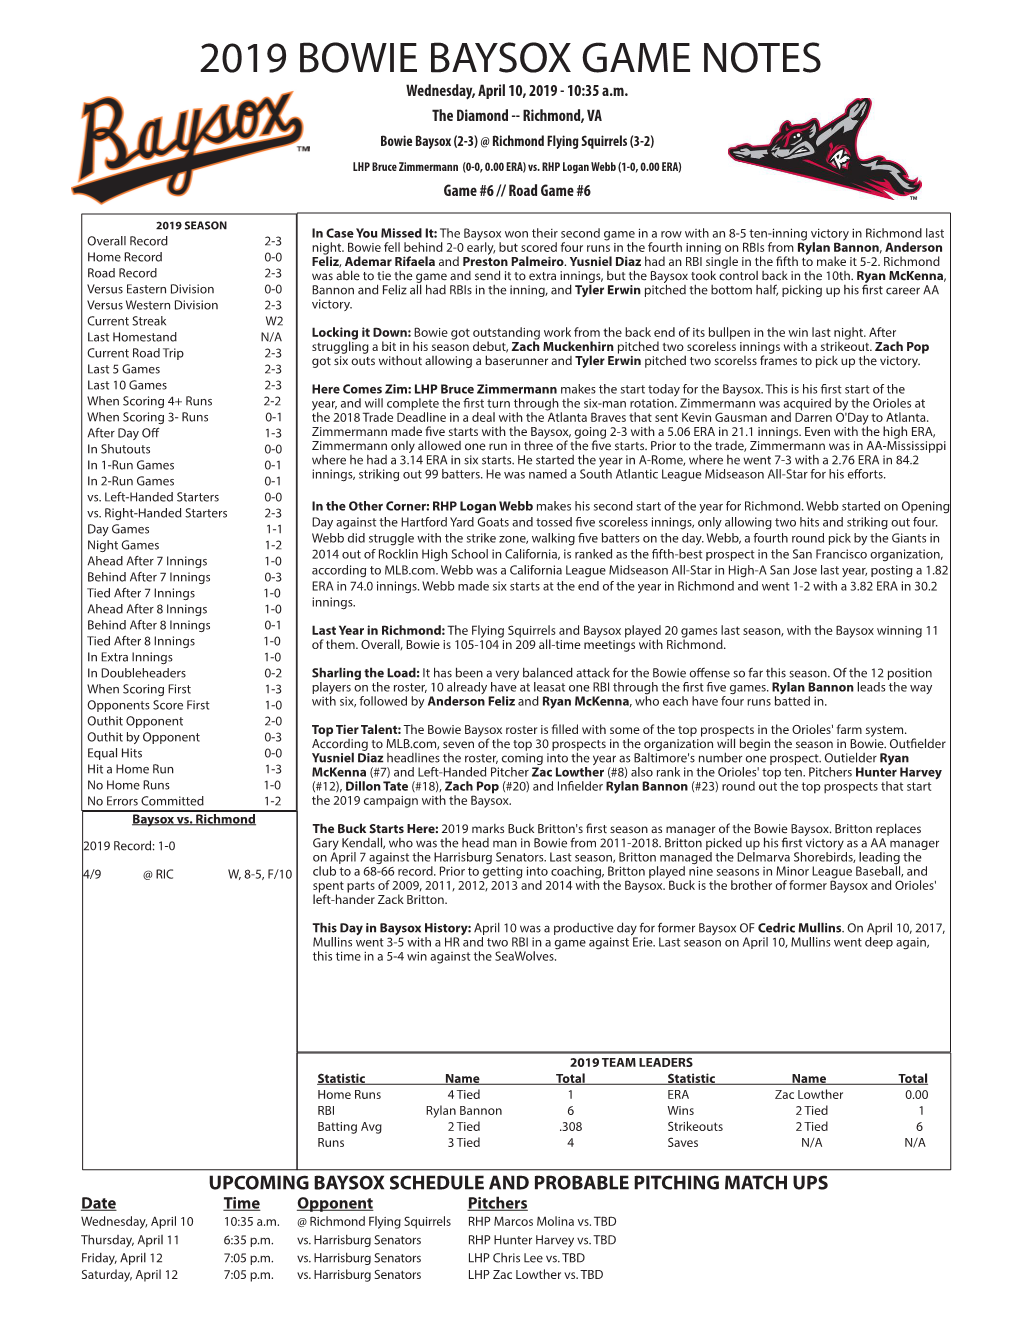 2019 BOWIE BAYSOX GAME NOTES Wednesday, April 10, 2019 - 10:35 A.M